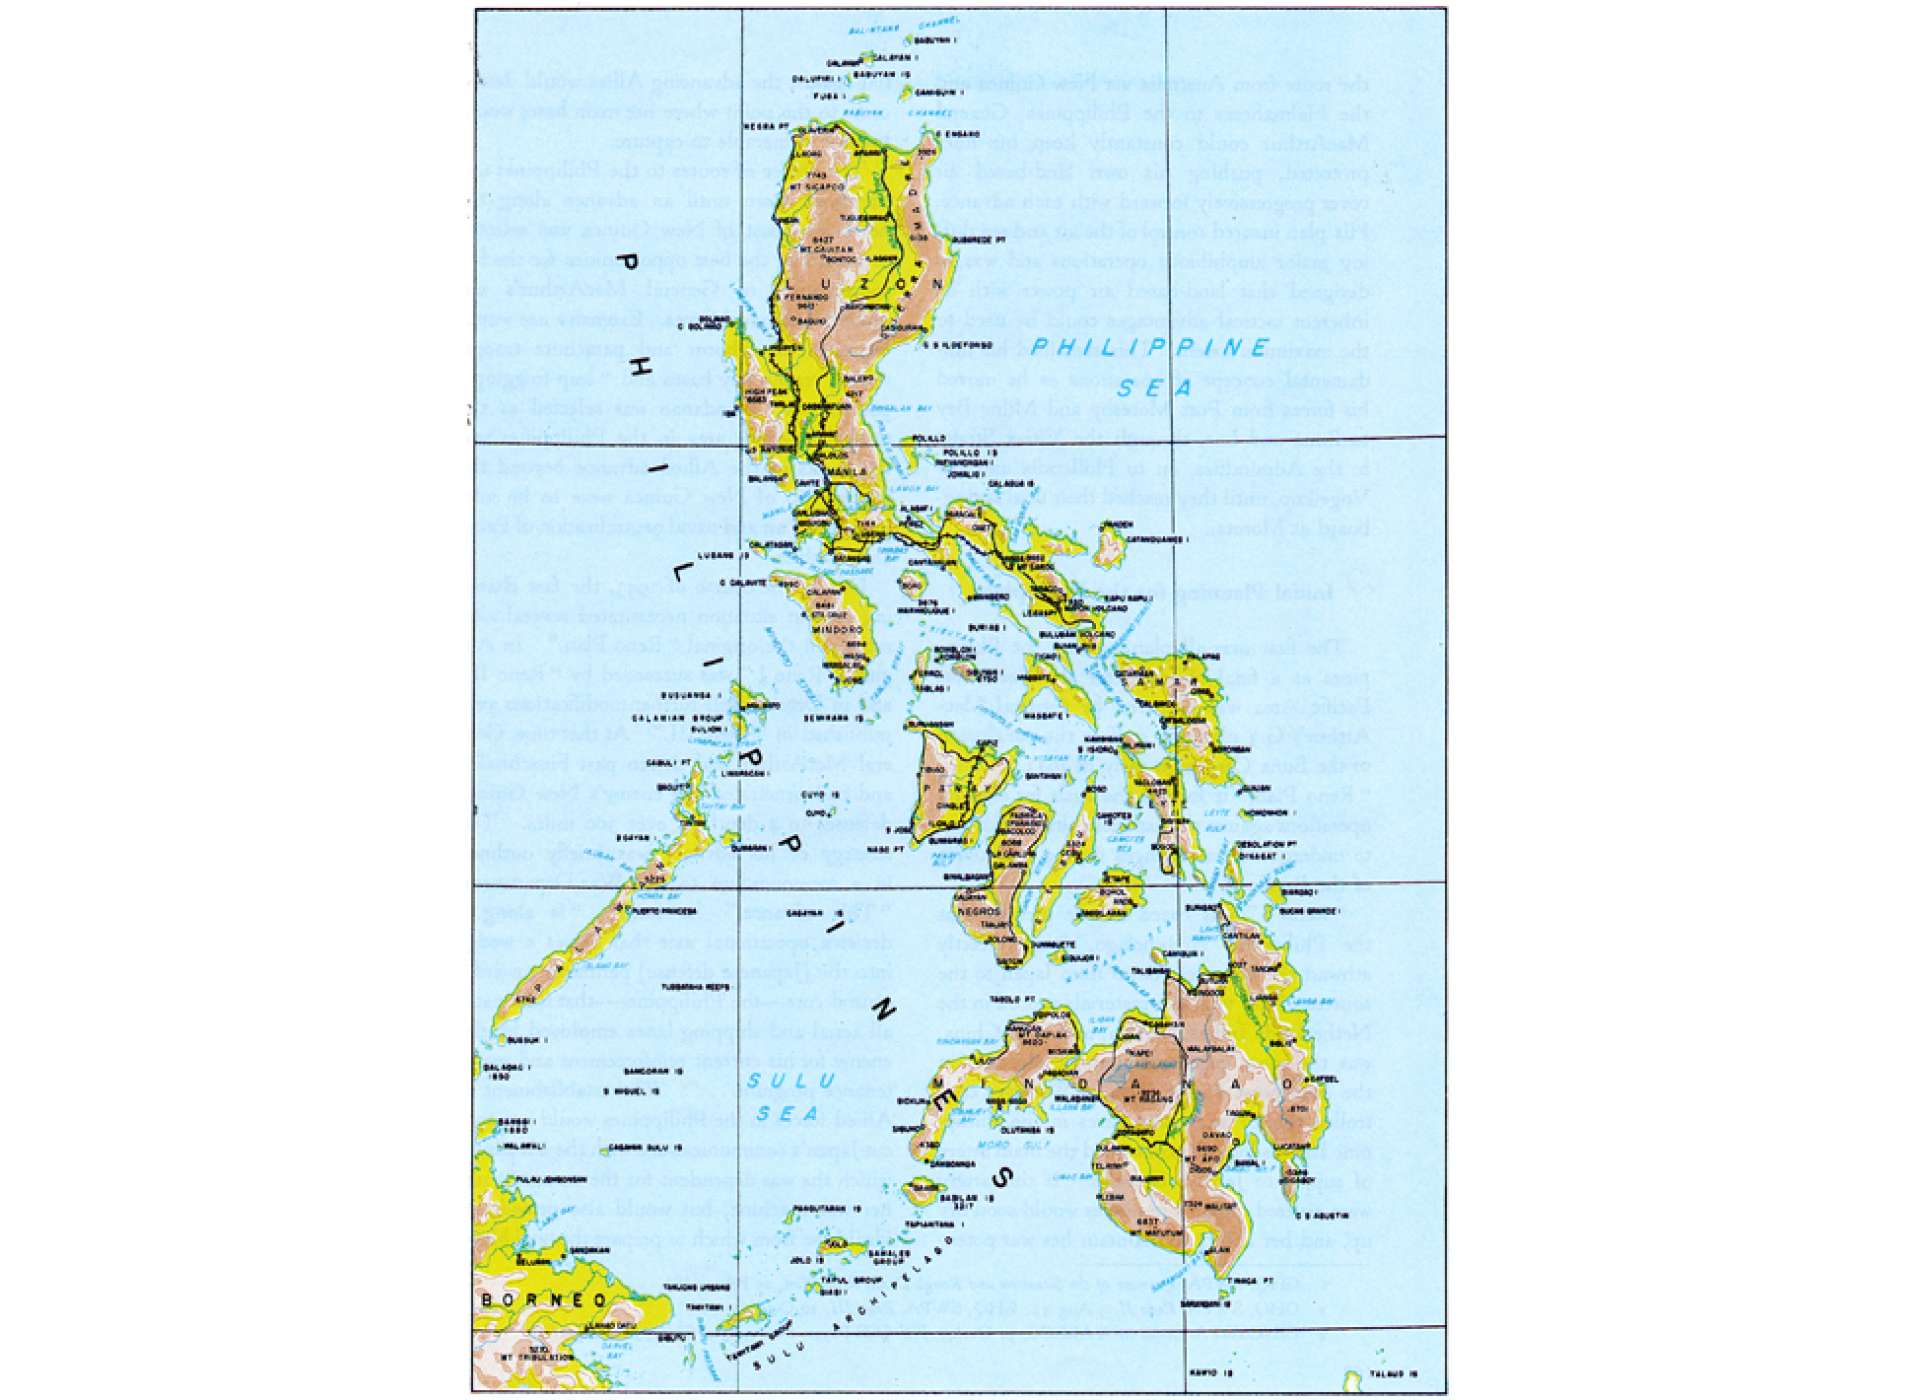 The Philippines Islands with Palawan Province depicted as the westernmost island in the Philippine archipelago. Courtesy of the US Army, Reports of General MacArthur: The Campaigns of MacArthur in the Pacific, Vol. 1, Plate No. 48